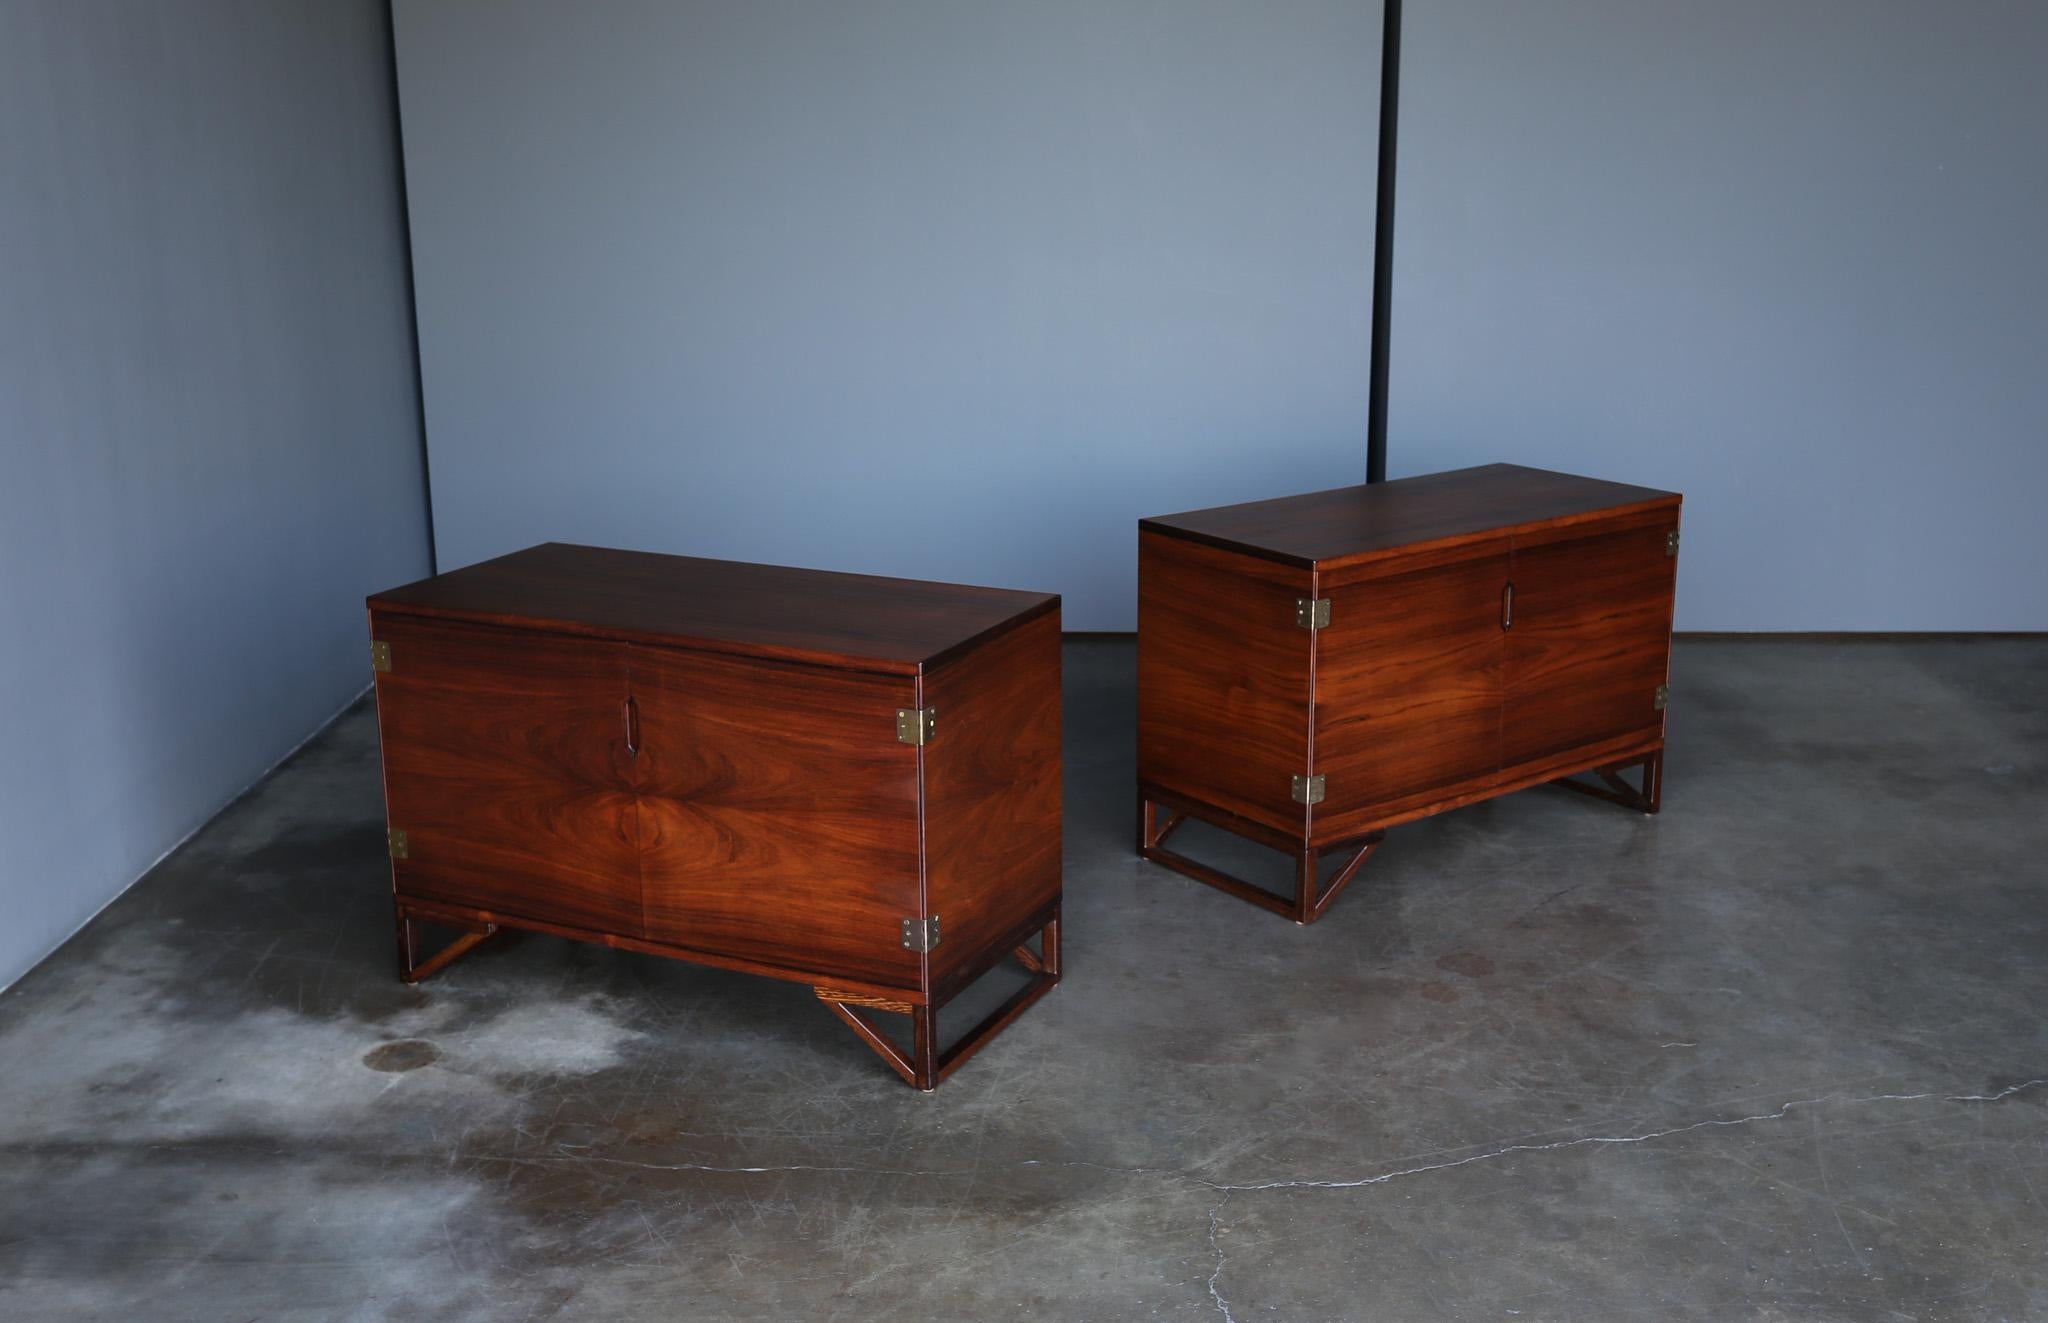 Svend Langkilde Rosewood Cabinets for Langkilde Møbler, Denmark, c.1960.  This design was retailed by Illums Bolighus.  Beautiful rosewood grain.  This pair has been professionally restored.  